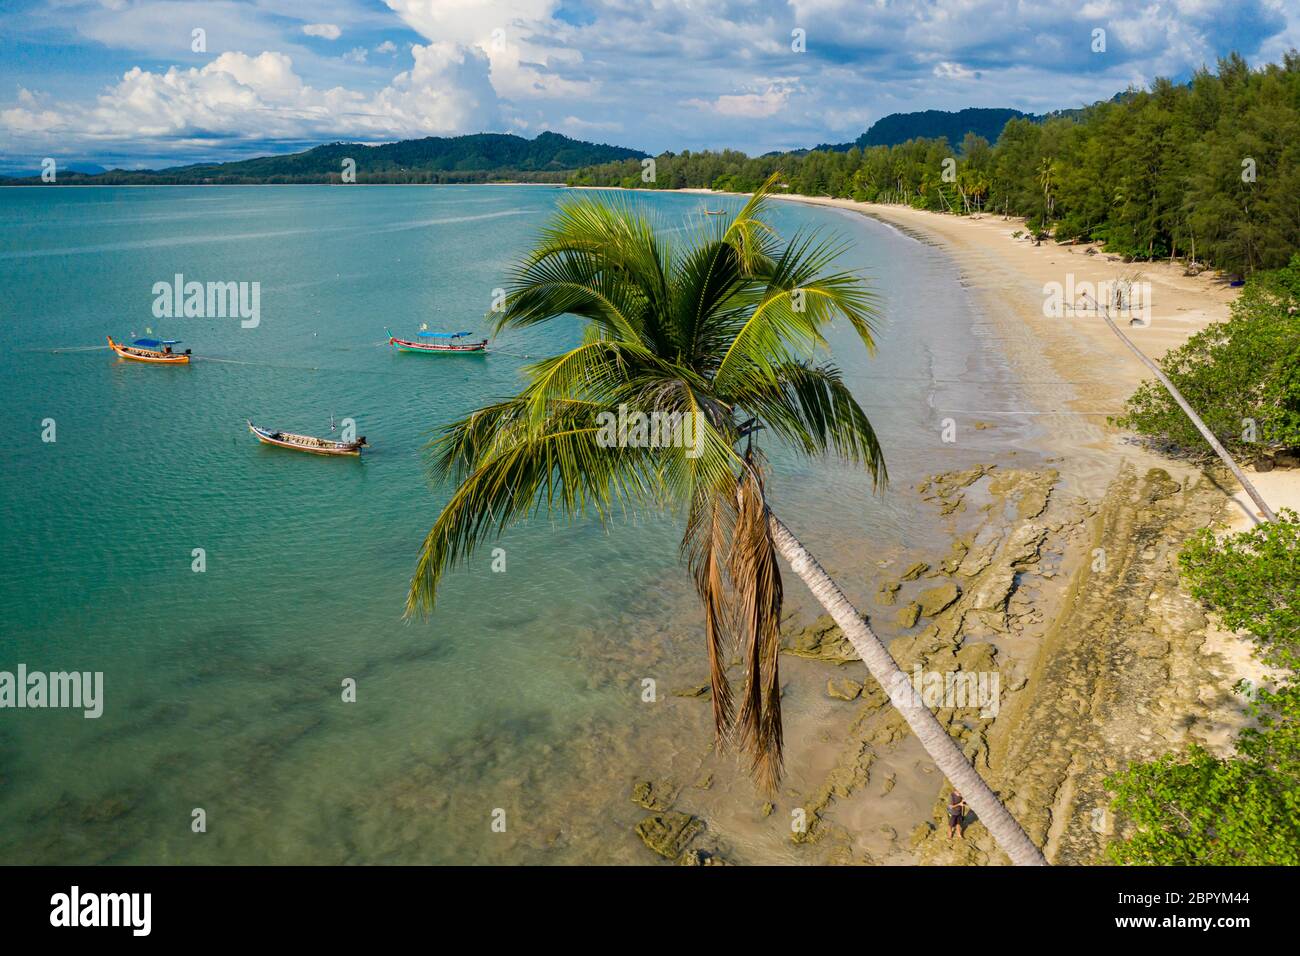 Aerial view of a beautiful, empty tropical beach surrounded by palm trees with small wooden fishing boats Stock Photo